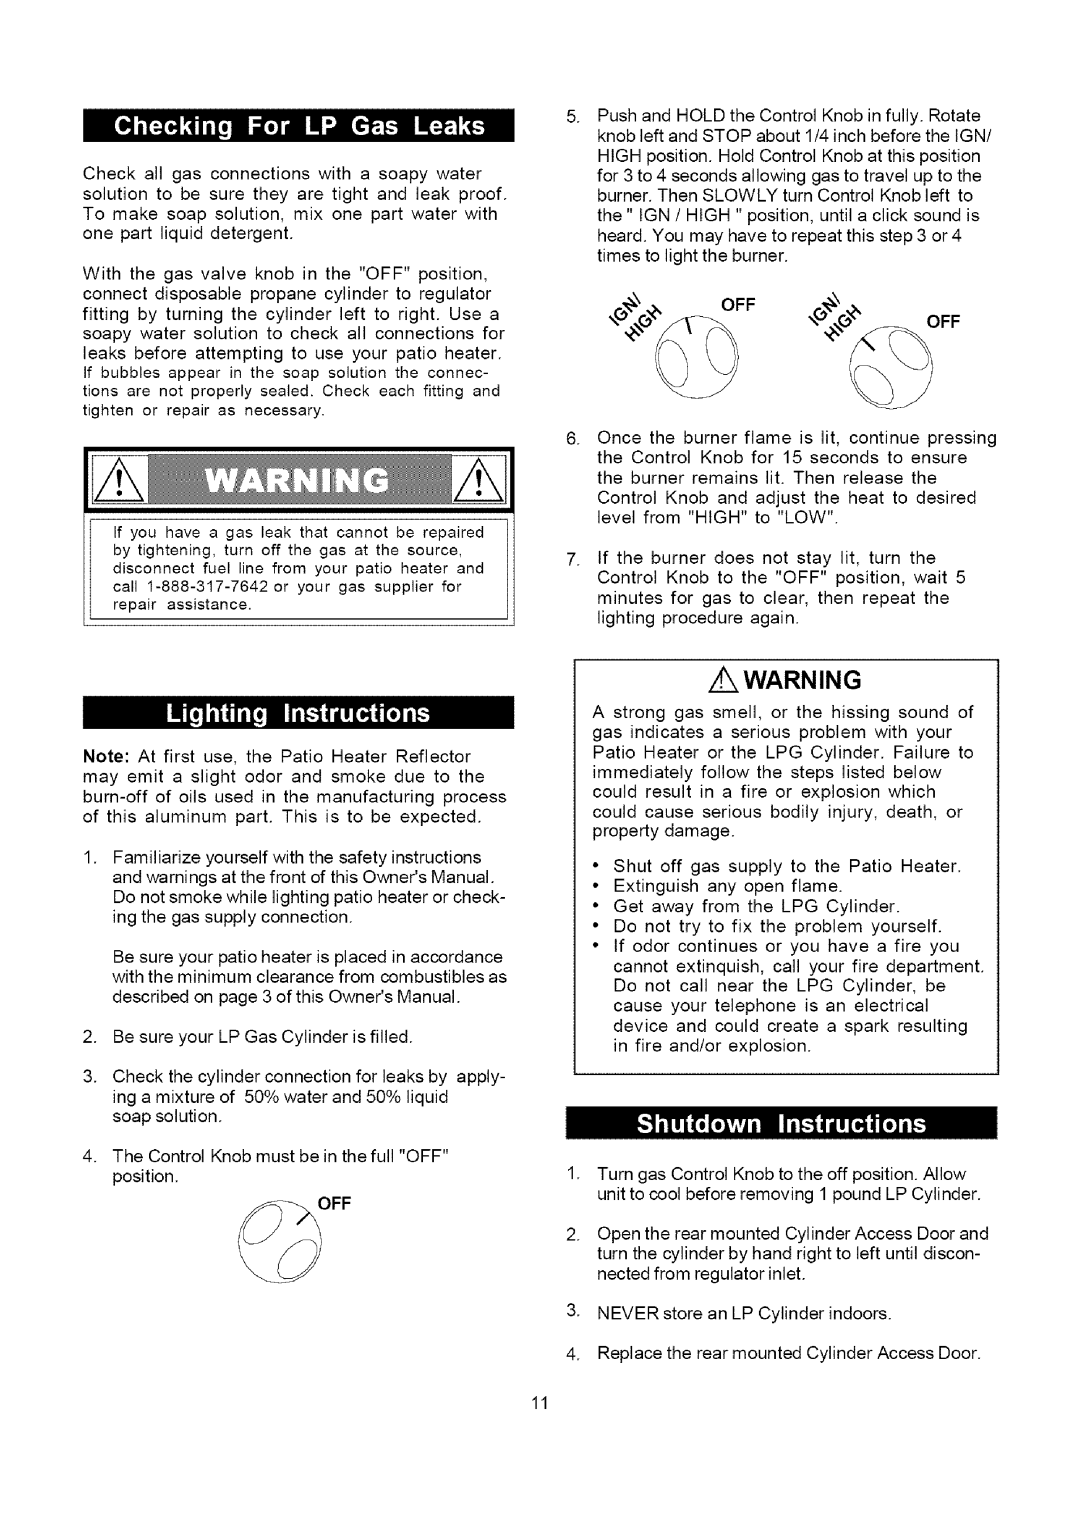 Grand Hall 22899 owner manual Checkall gas connectionswith a soapywater, z WARNING 